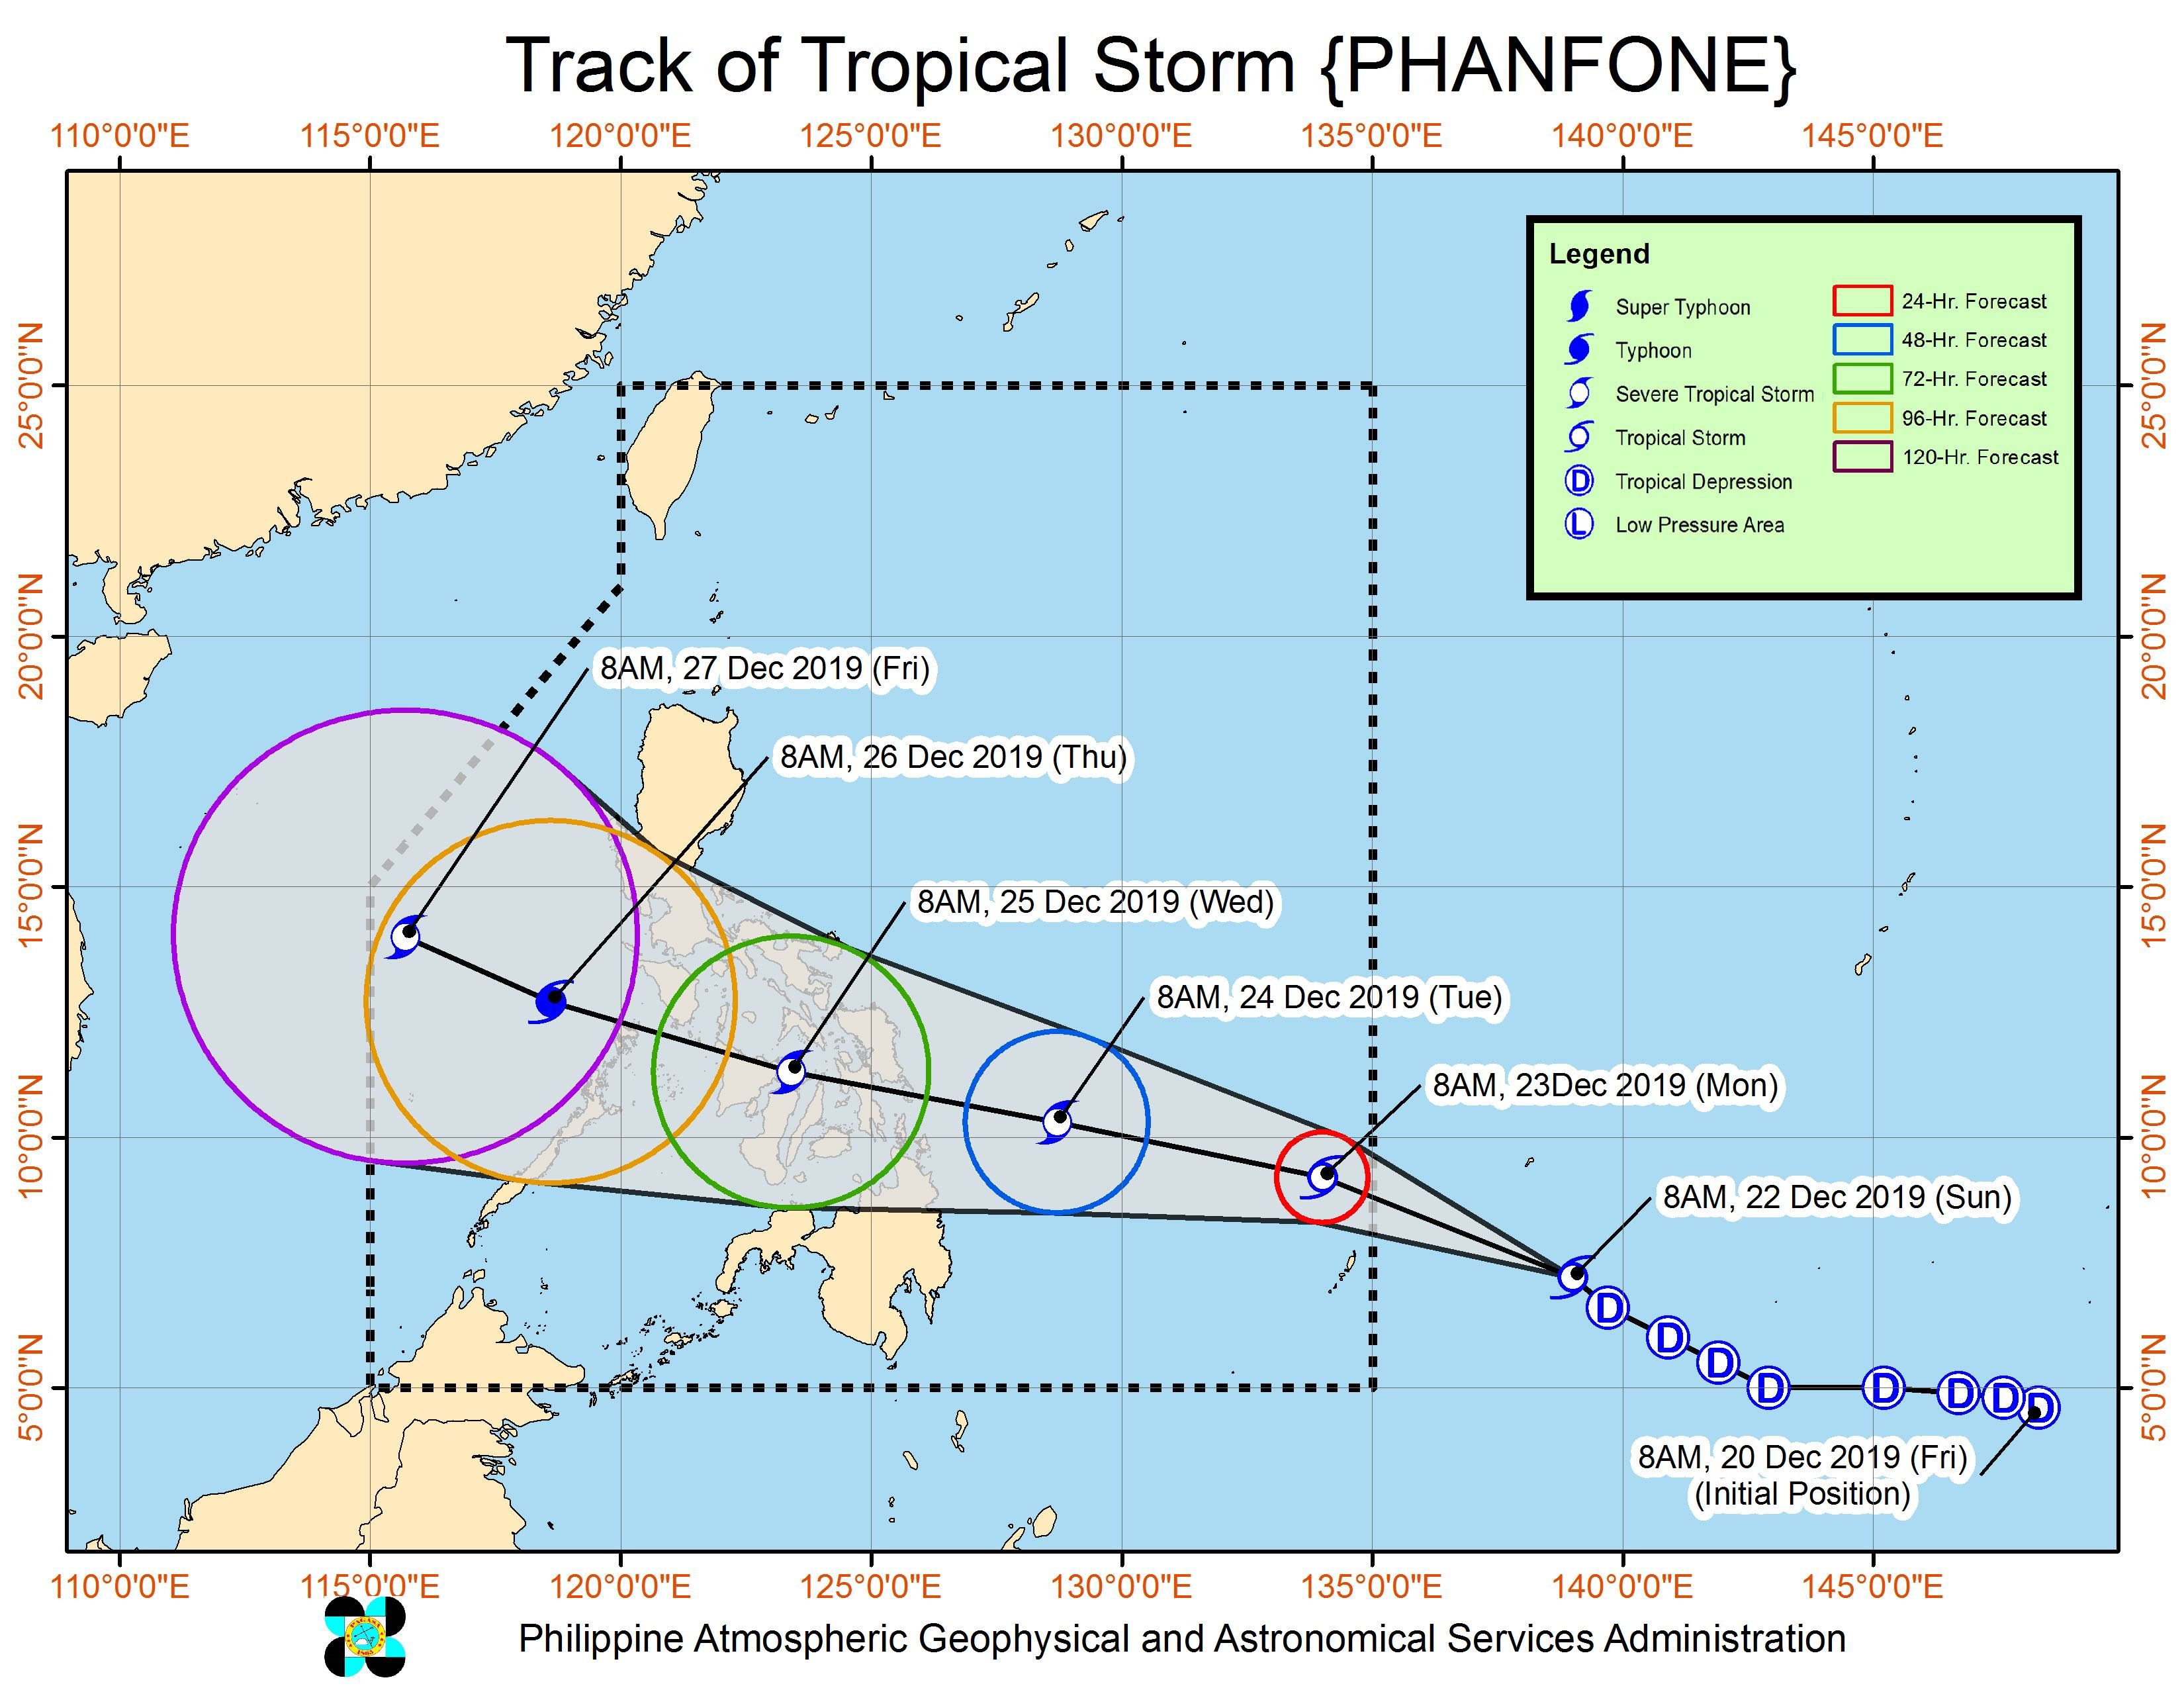 Forecast track of Tropical Storm Phanfone, which is still outside the Philippine Area of Responsibility, as of December 22, 2019, 11 am. Image from PAGASA 